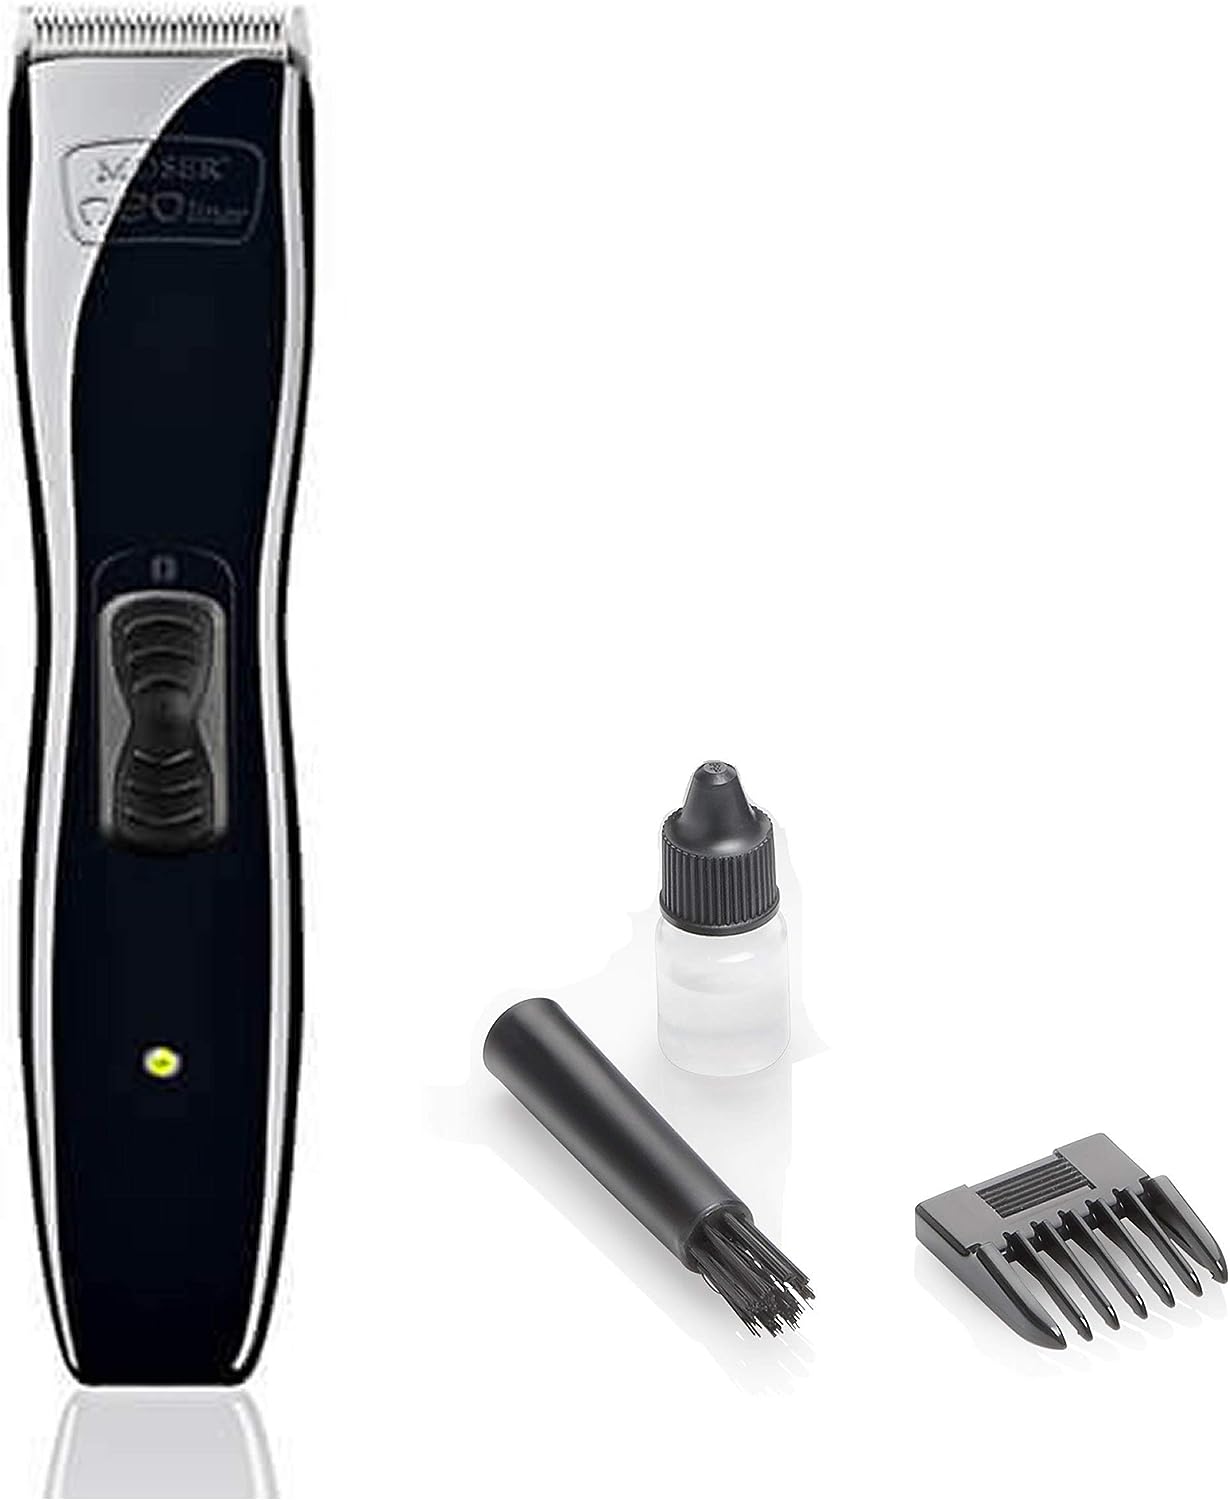 Moser 1586-0151 Neoliner2 Professional Cord/Cordless Hair Trimmer